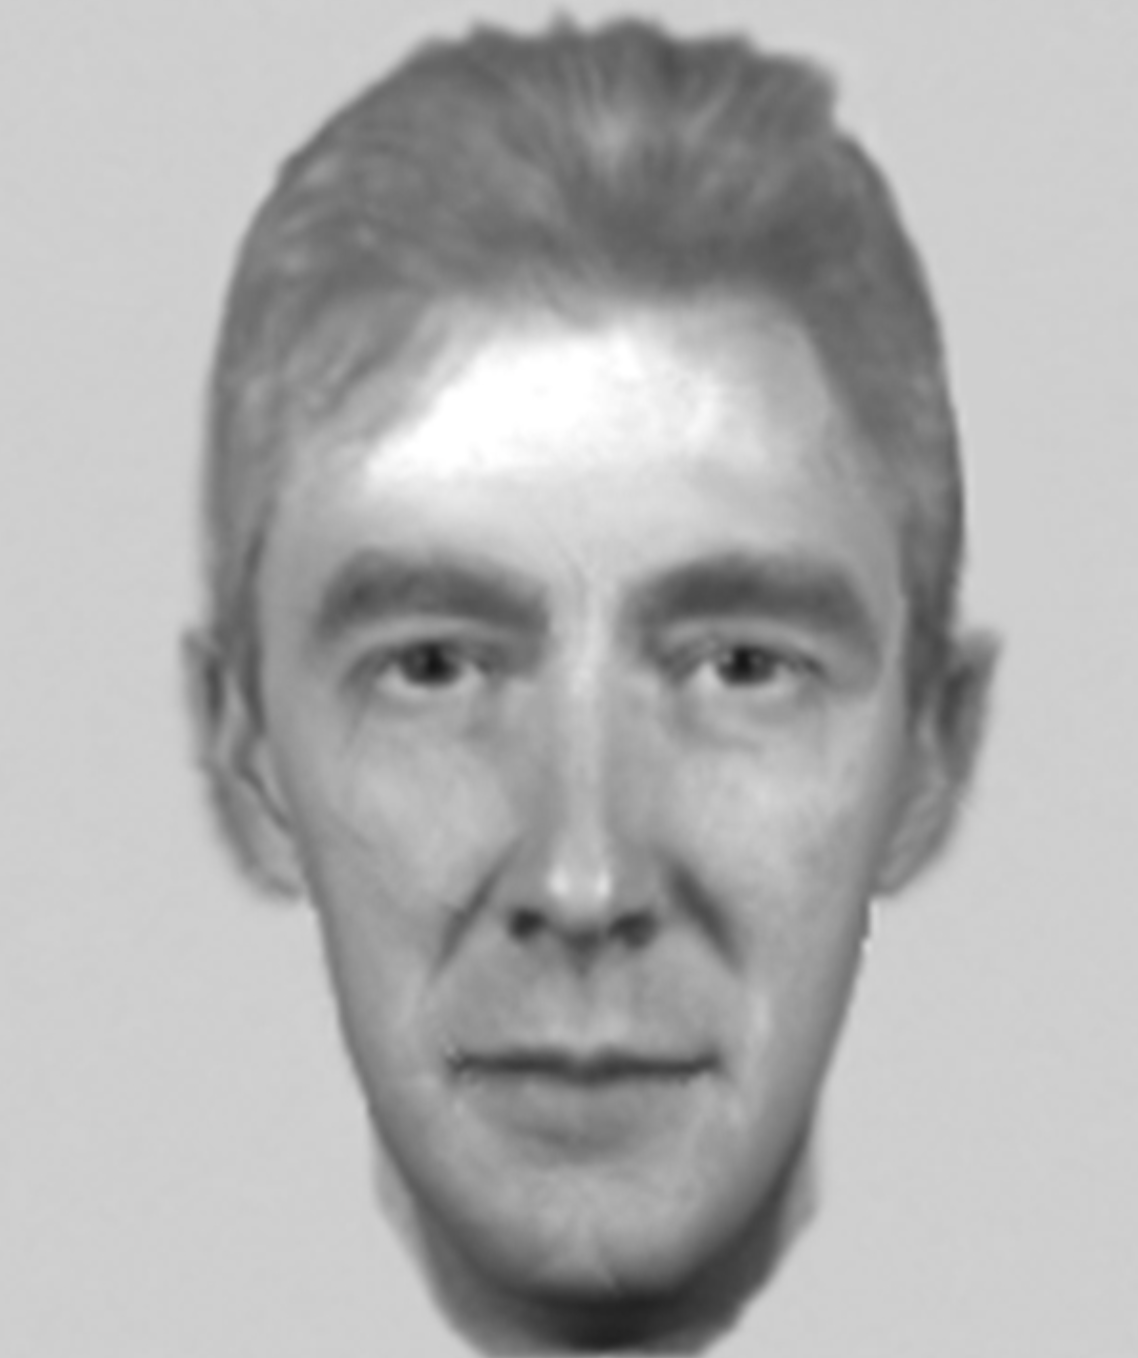 Greater Manchester Police release e-fit in the hunt for Oldham acid attacker, The Manc